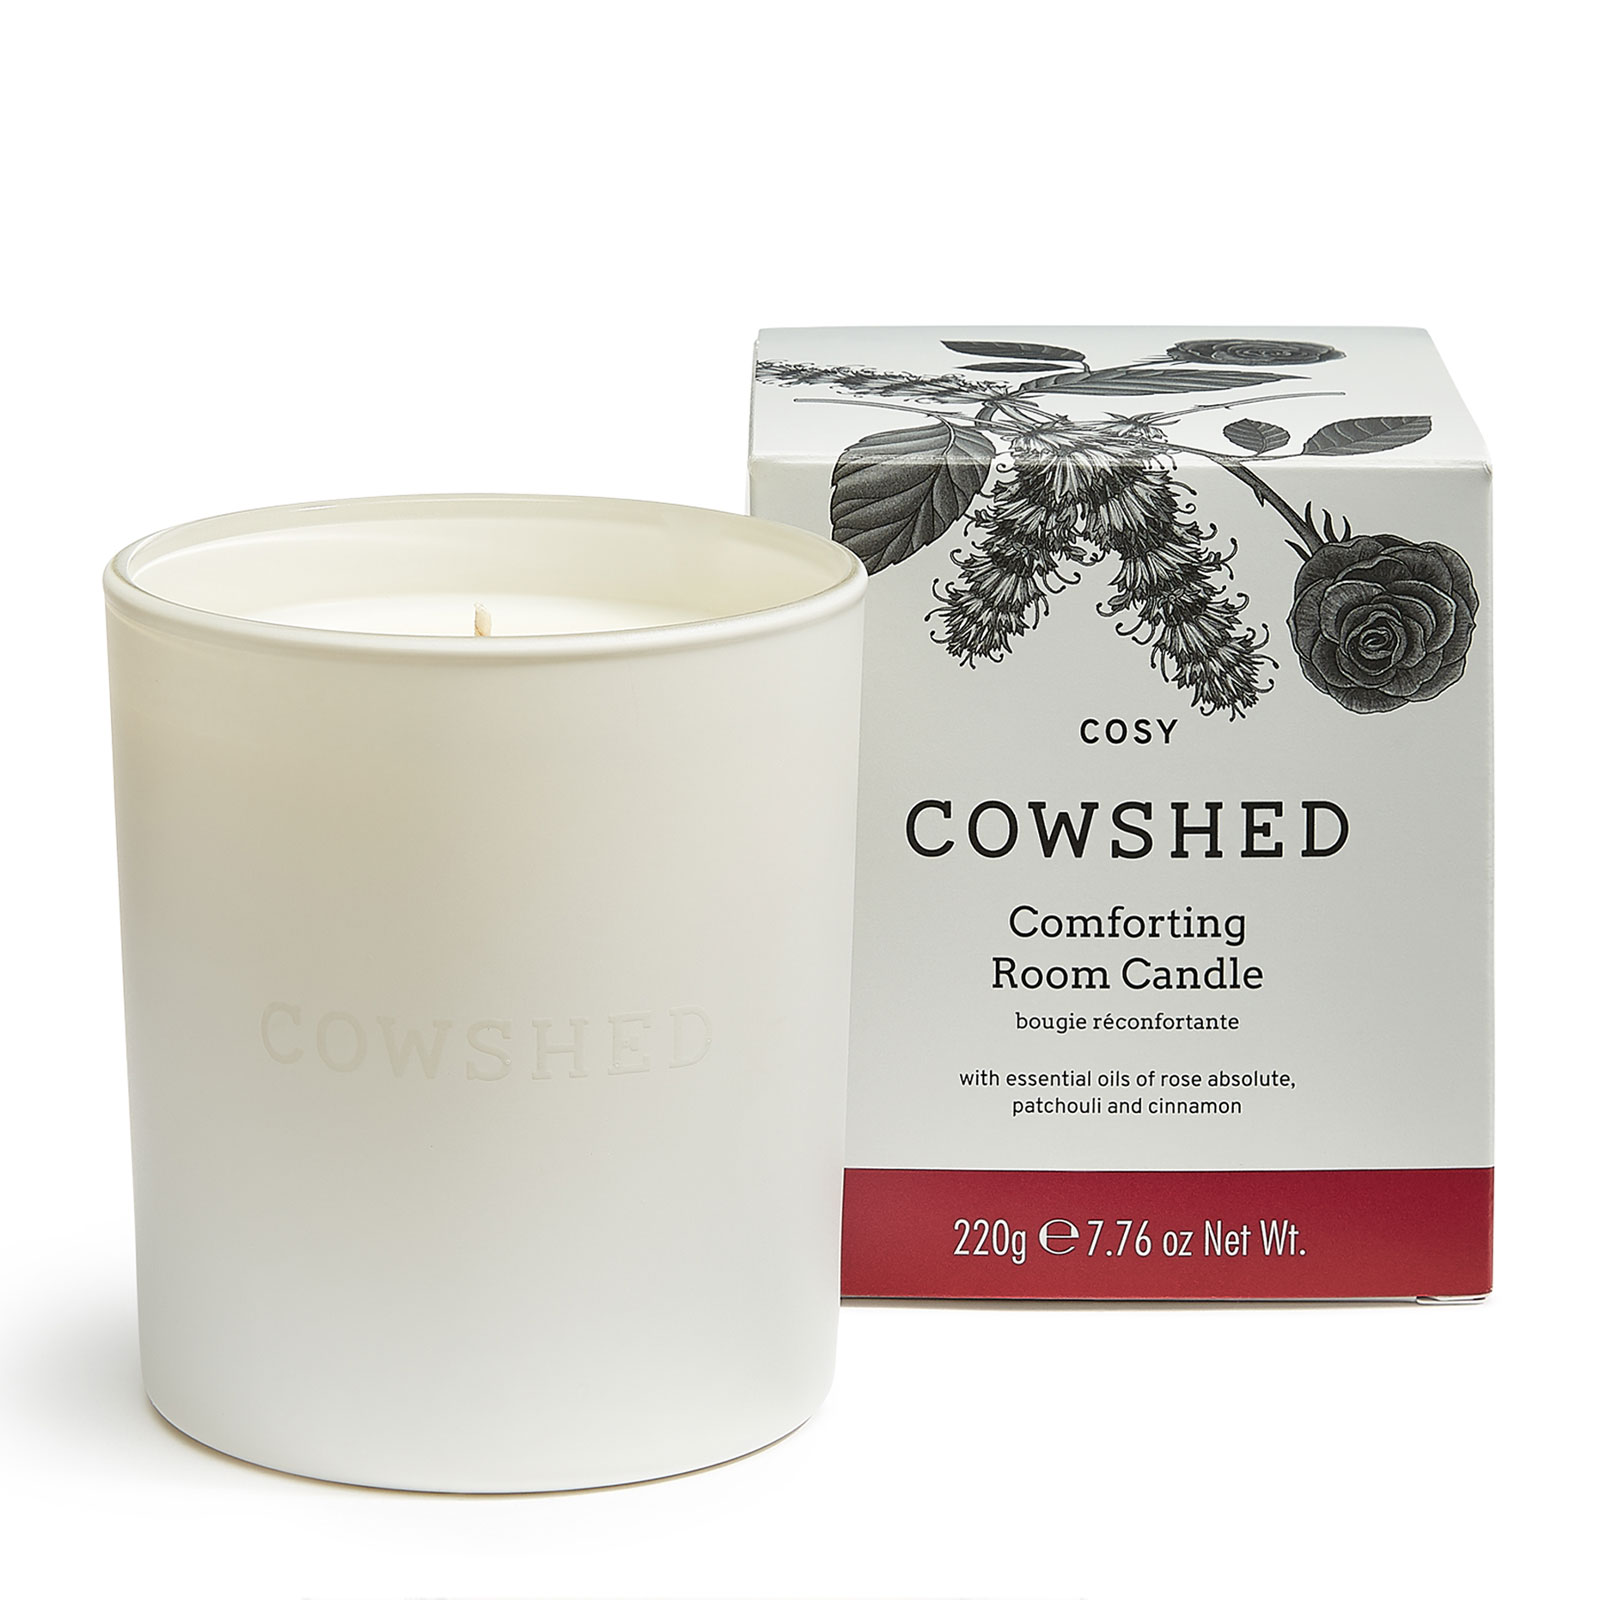 Cowshed Cosy Comforting Room Candle 220g